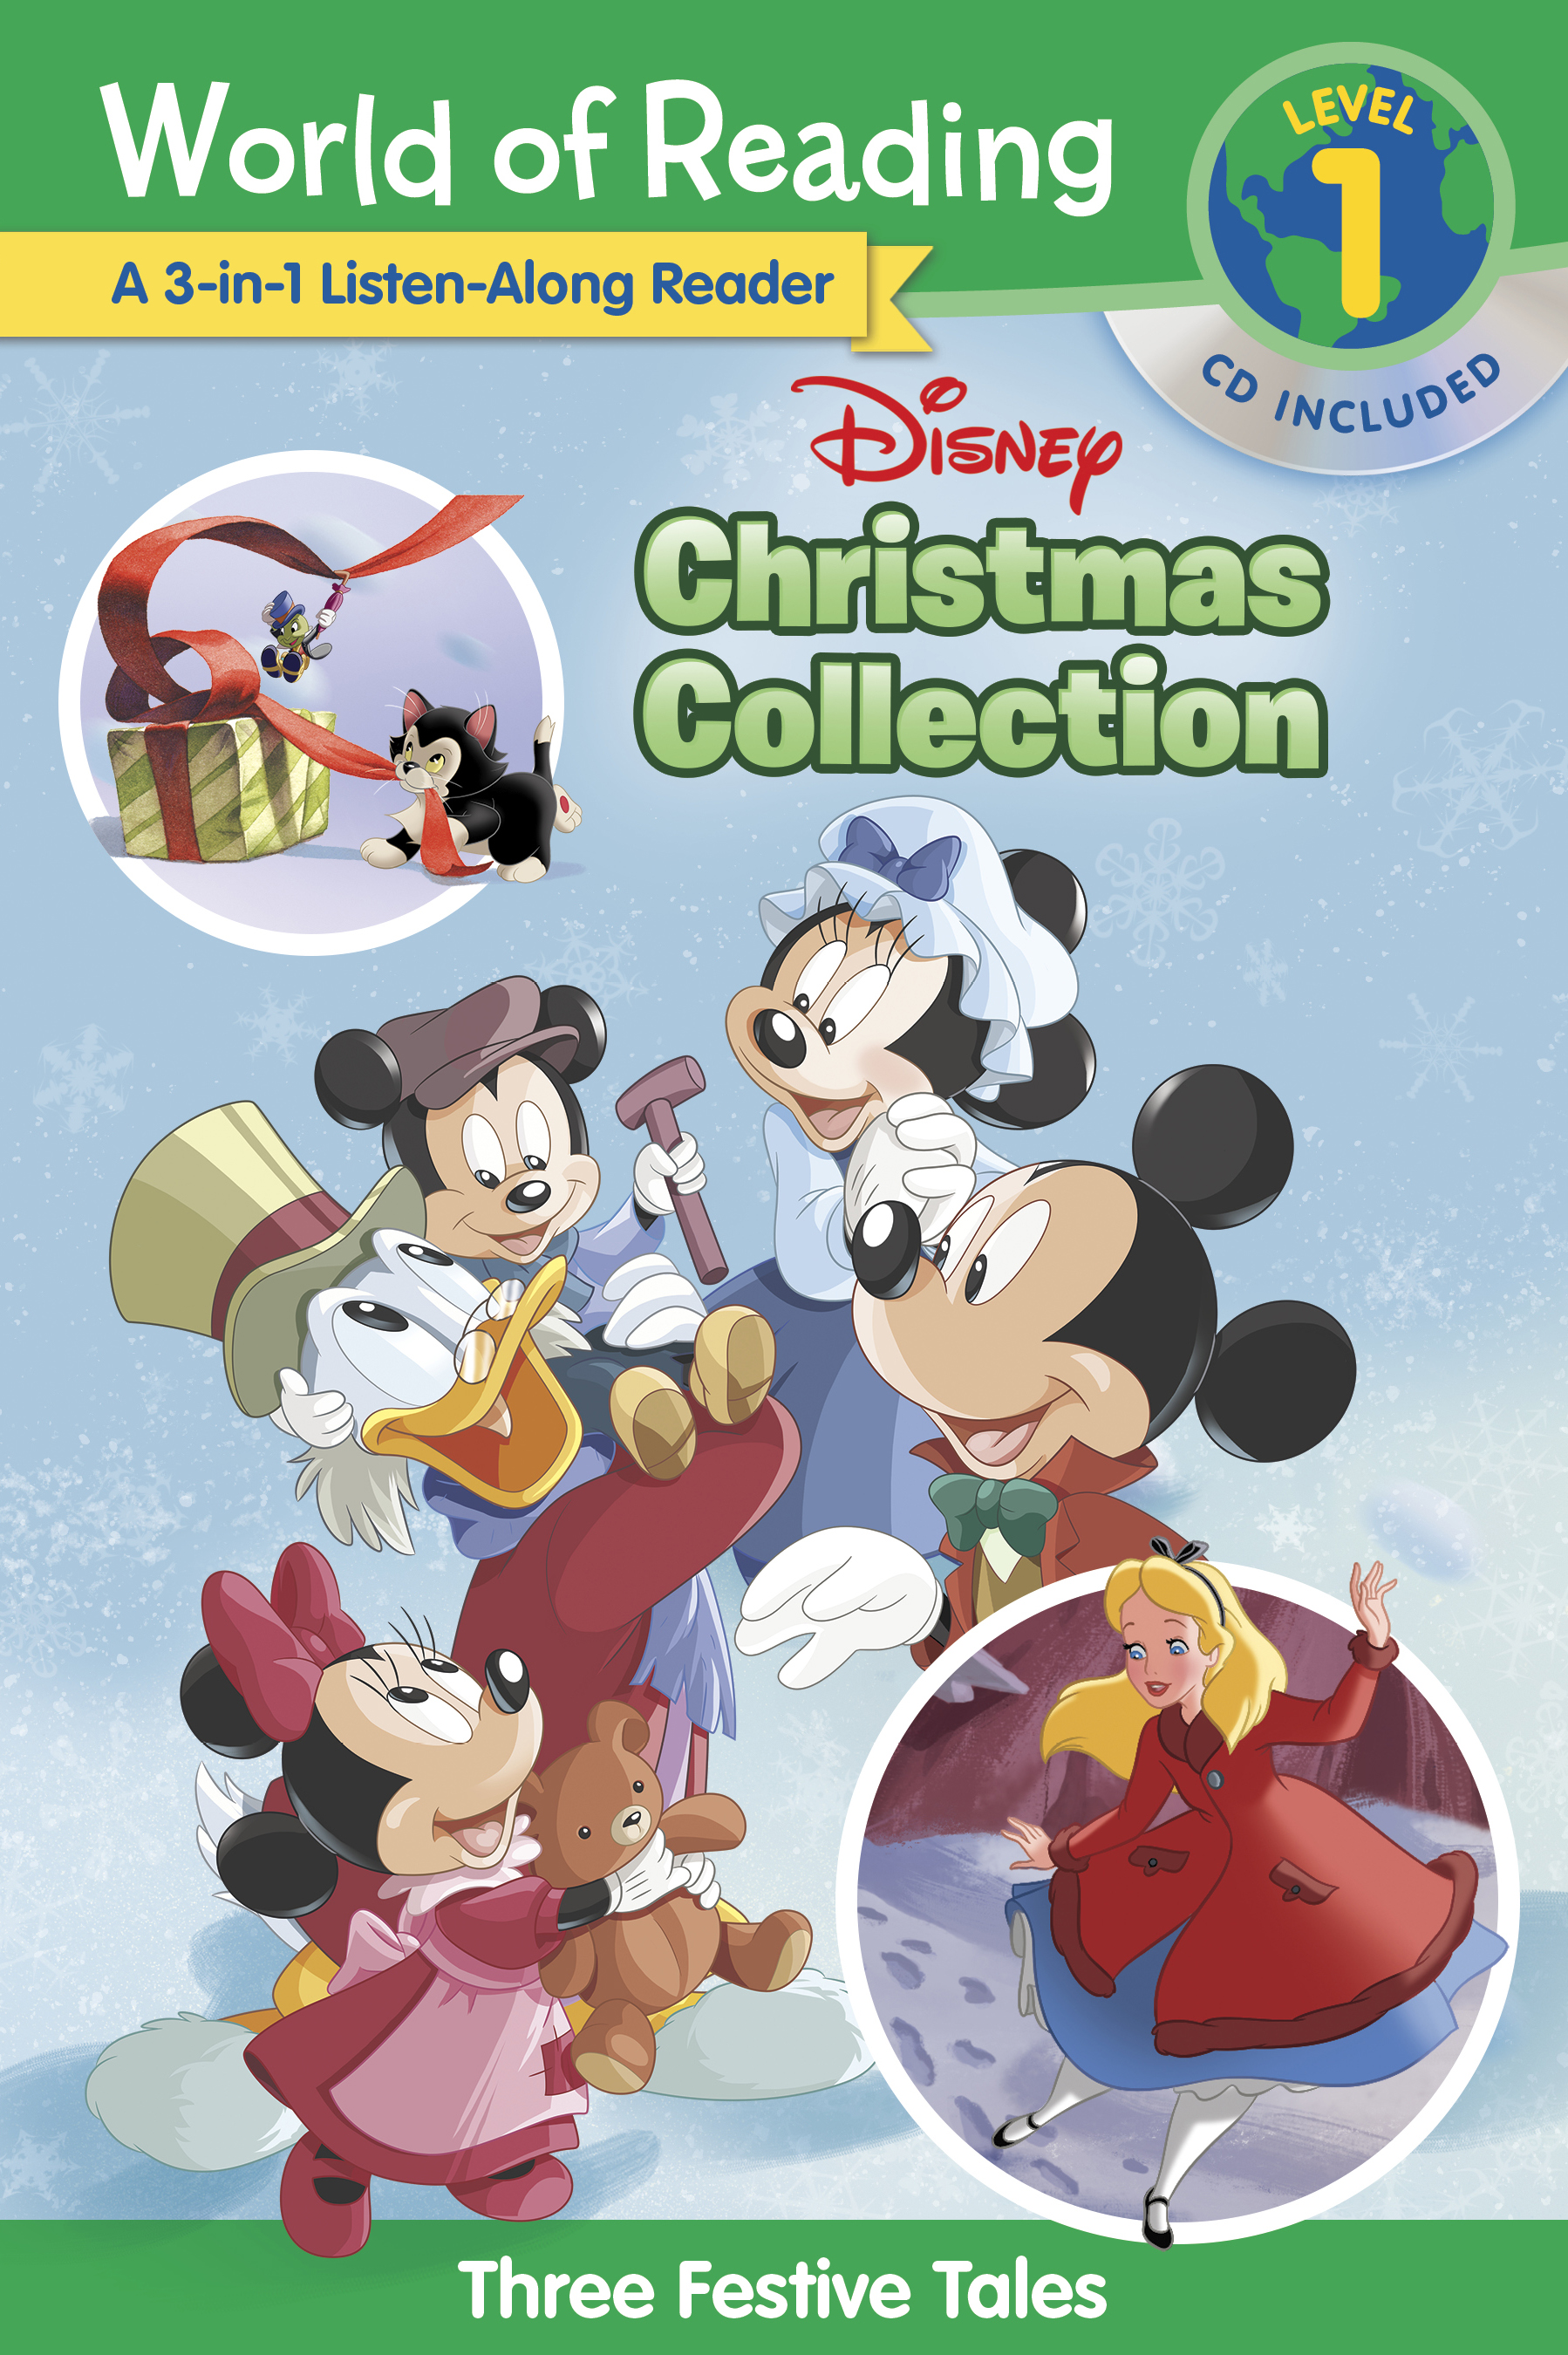 Book　Collection　Storybook　3-in-1　Books　World　of　Listen-Along　Disney　by　Reader　Reading　Art　Group　Disney　Disney　Team　Disney　Christmas